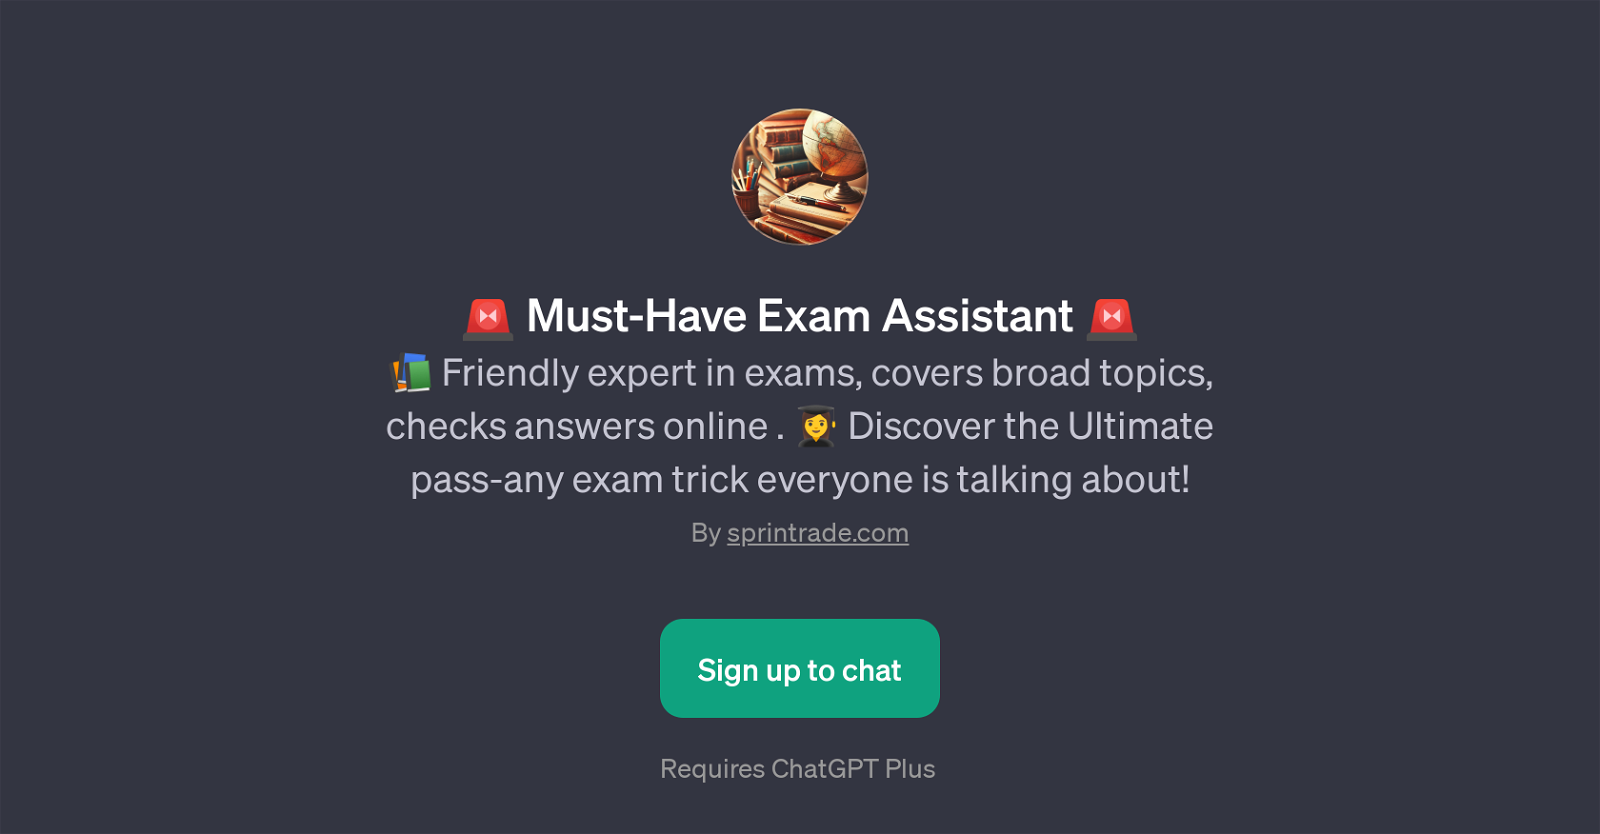 Must-Have Exam Assistant website